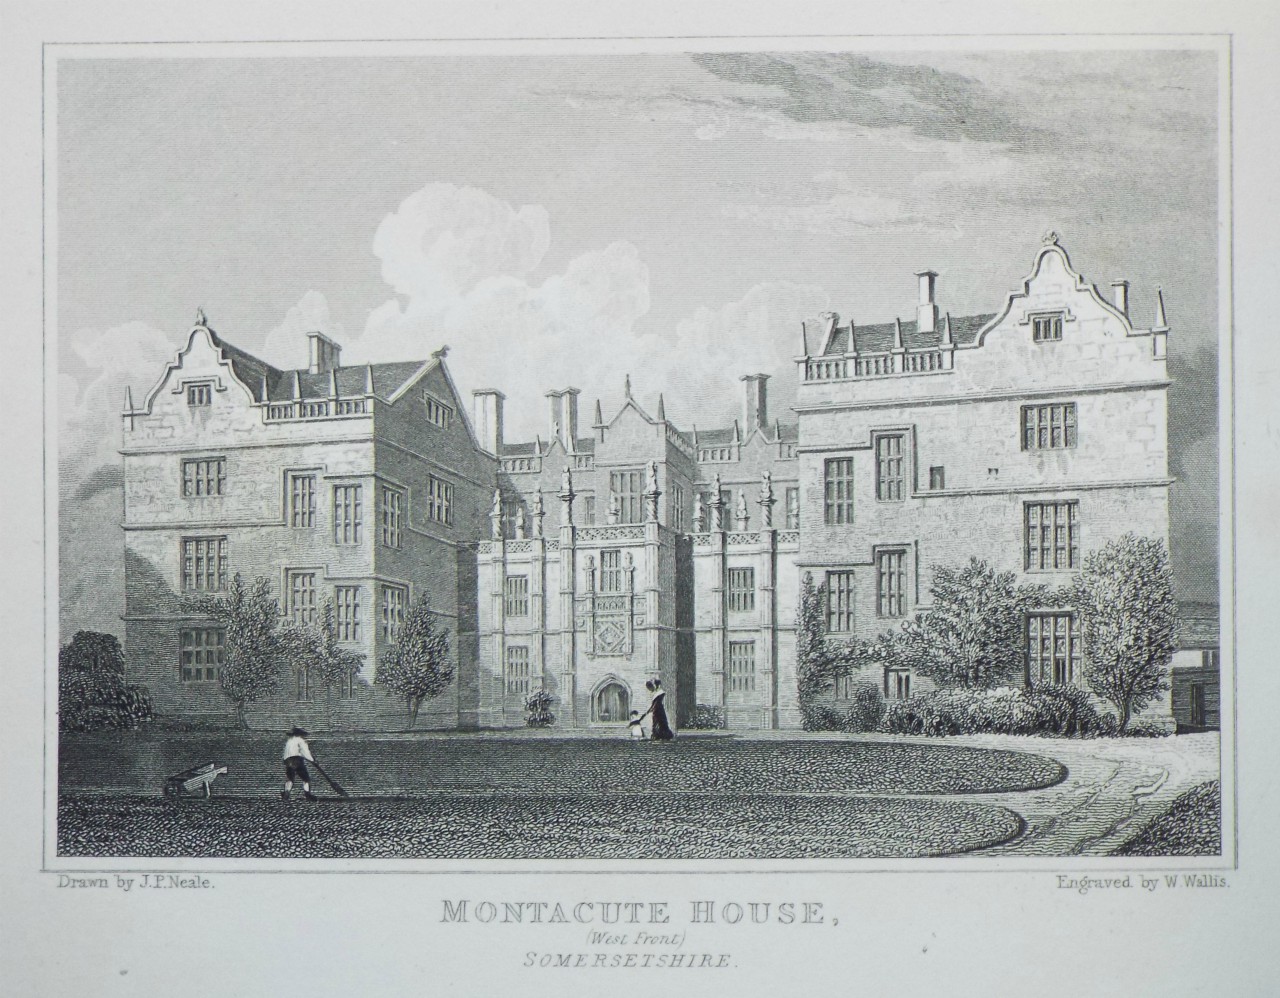 Print - Montacute House, (West Front) Somersetshire. - Wallis